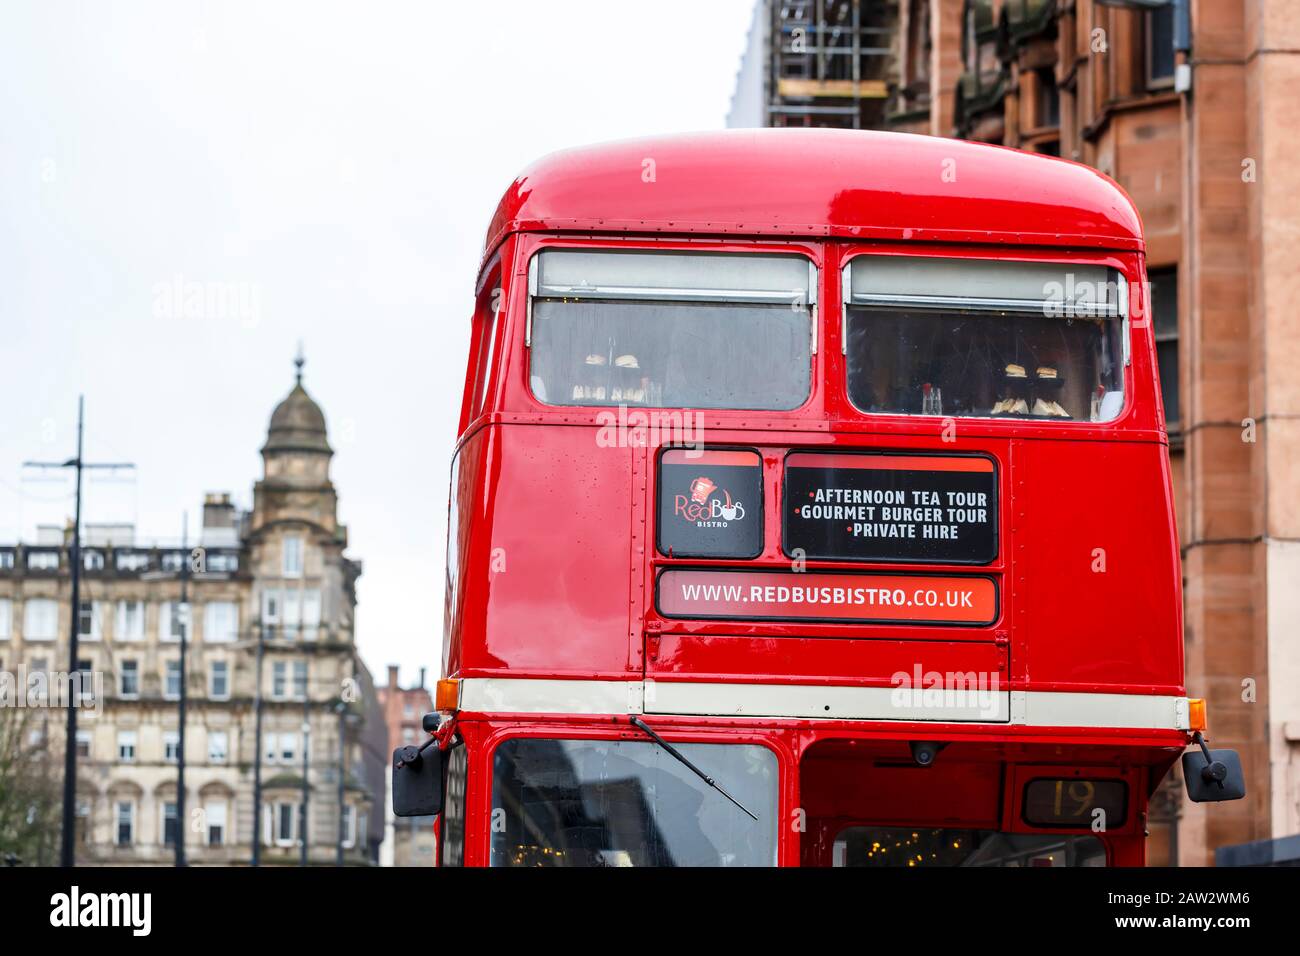 Detail of the front of the Red Bus Bistro in Glasgow city centre, Scotland, UK Stock Photo